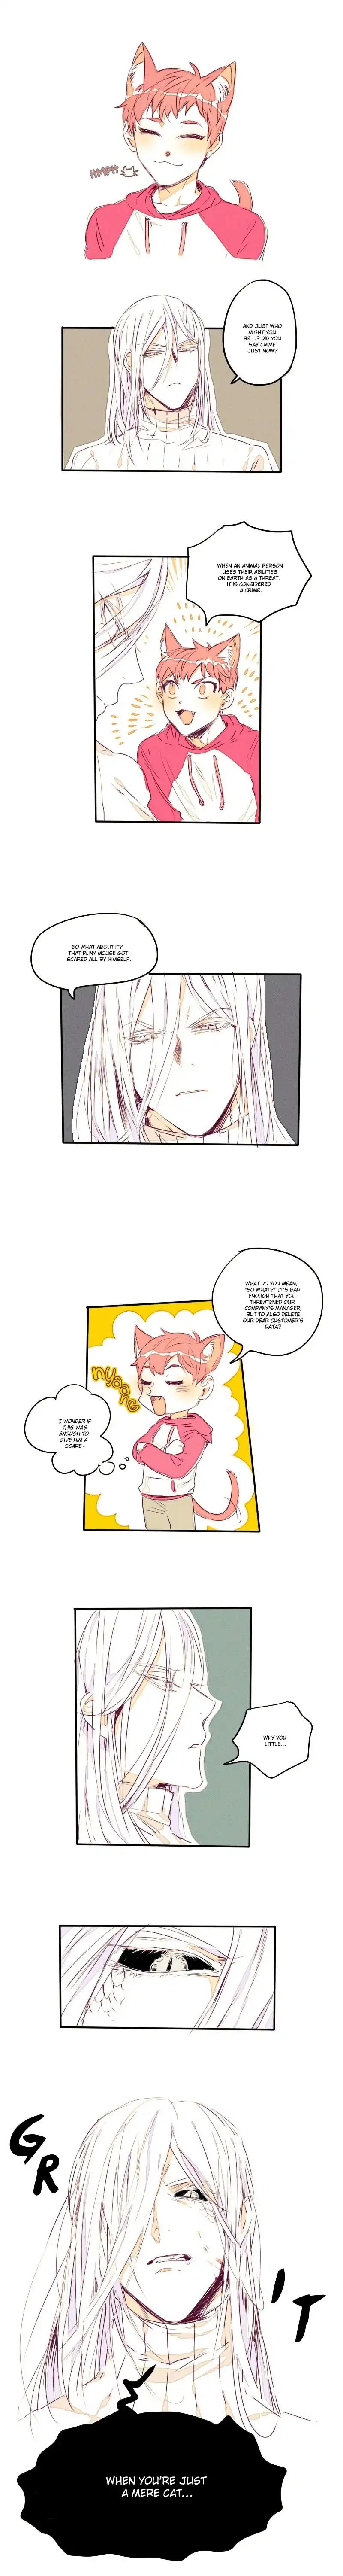 Marry Me? - Page 2